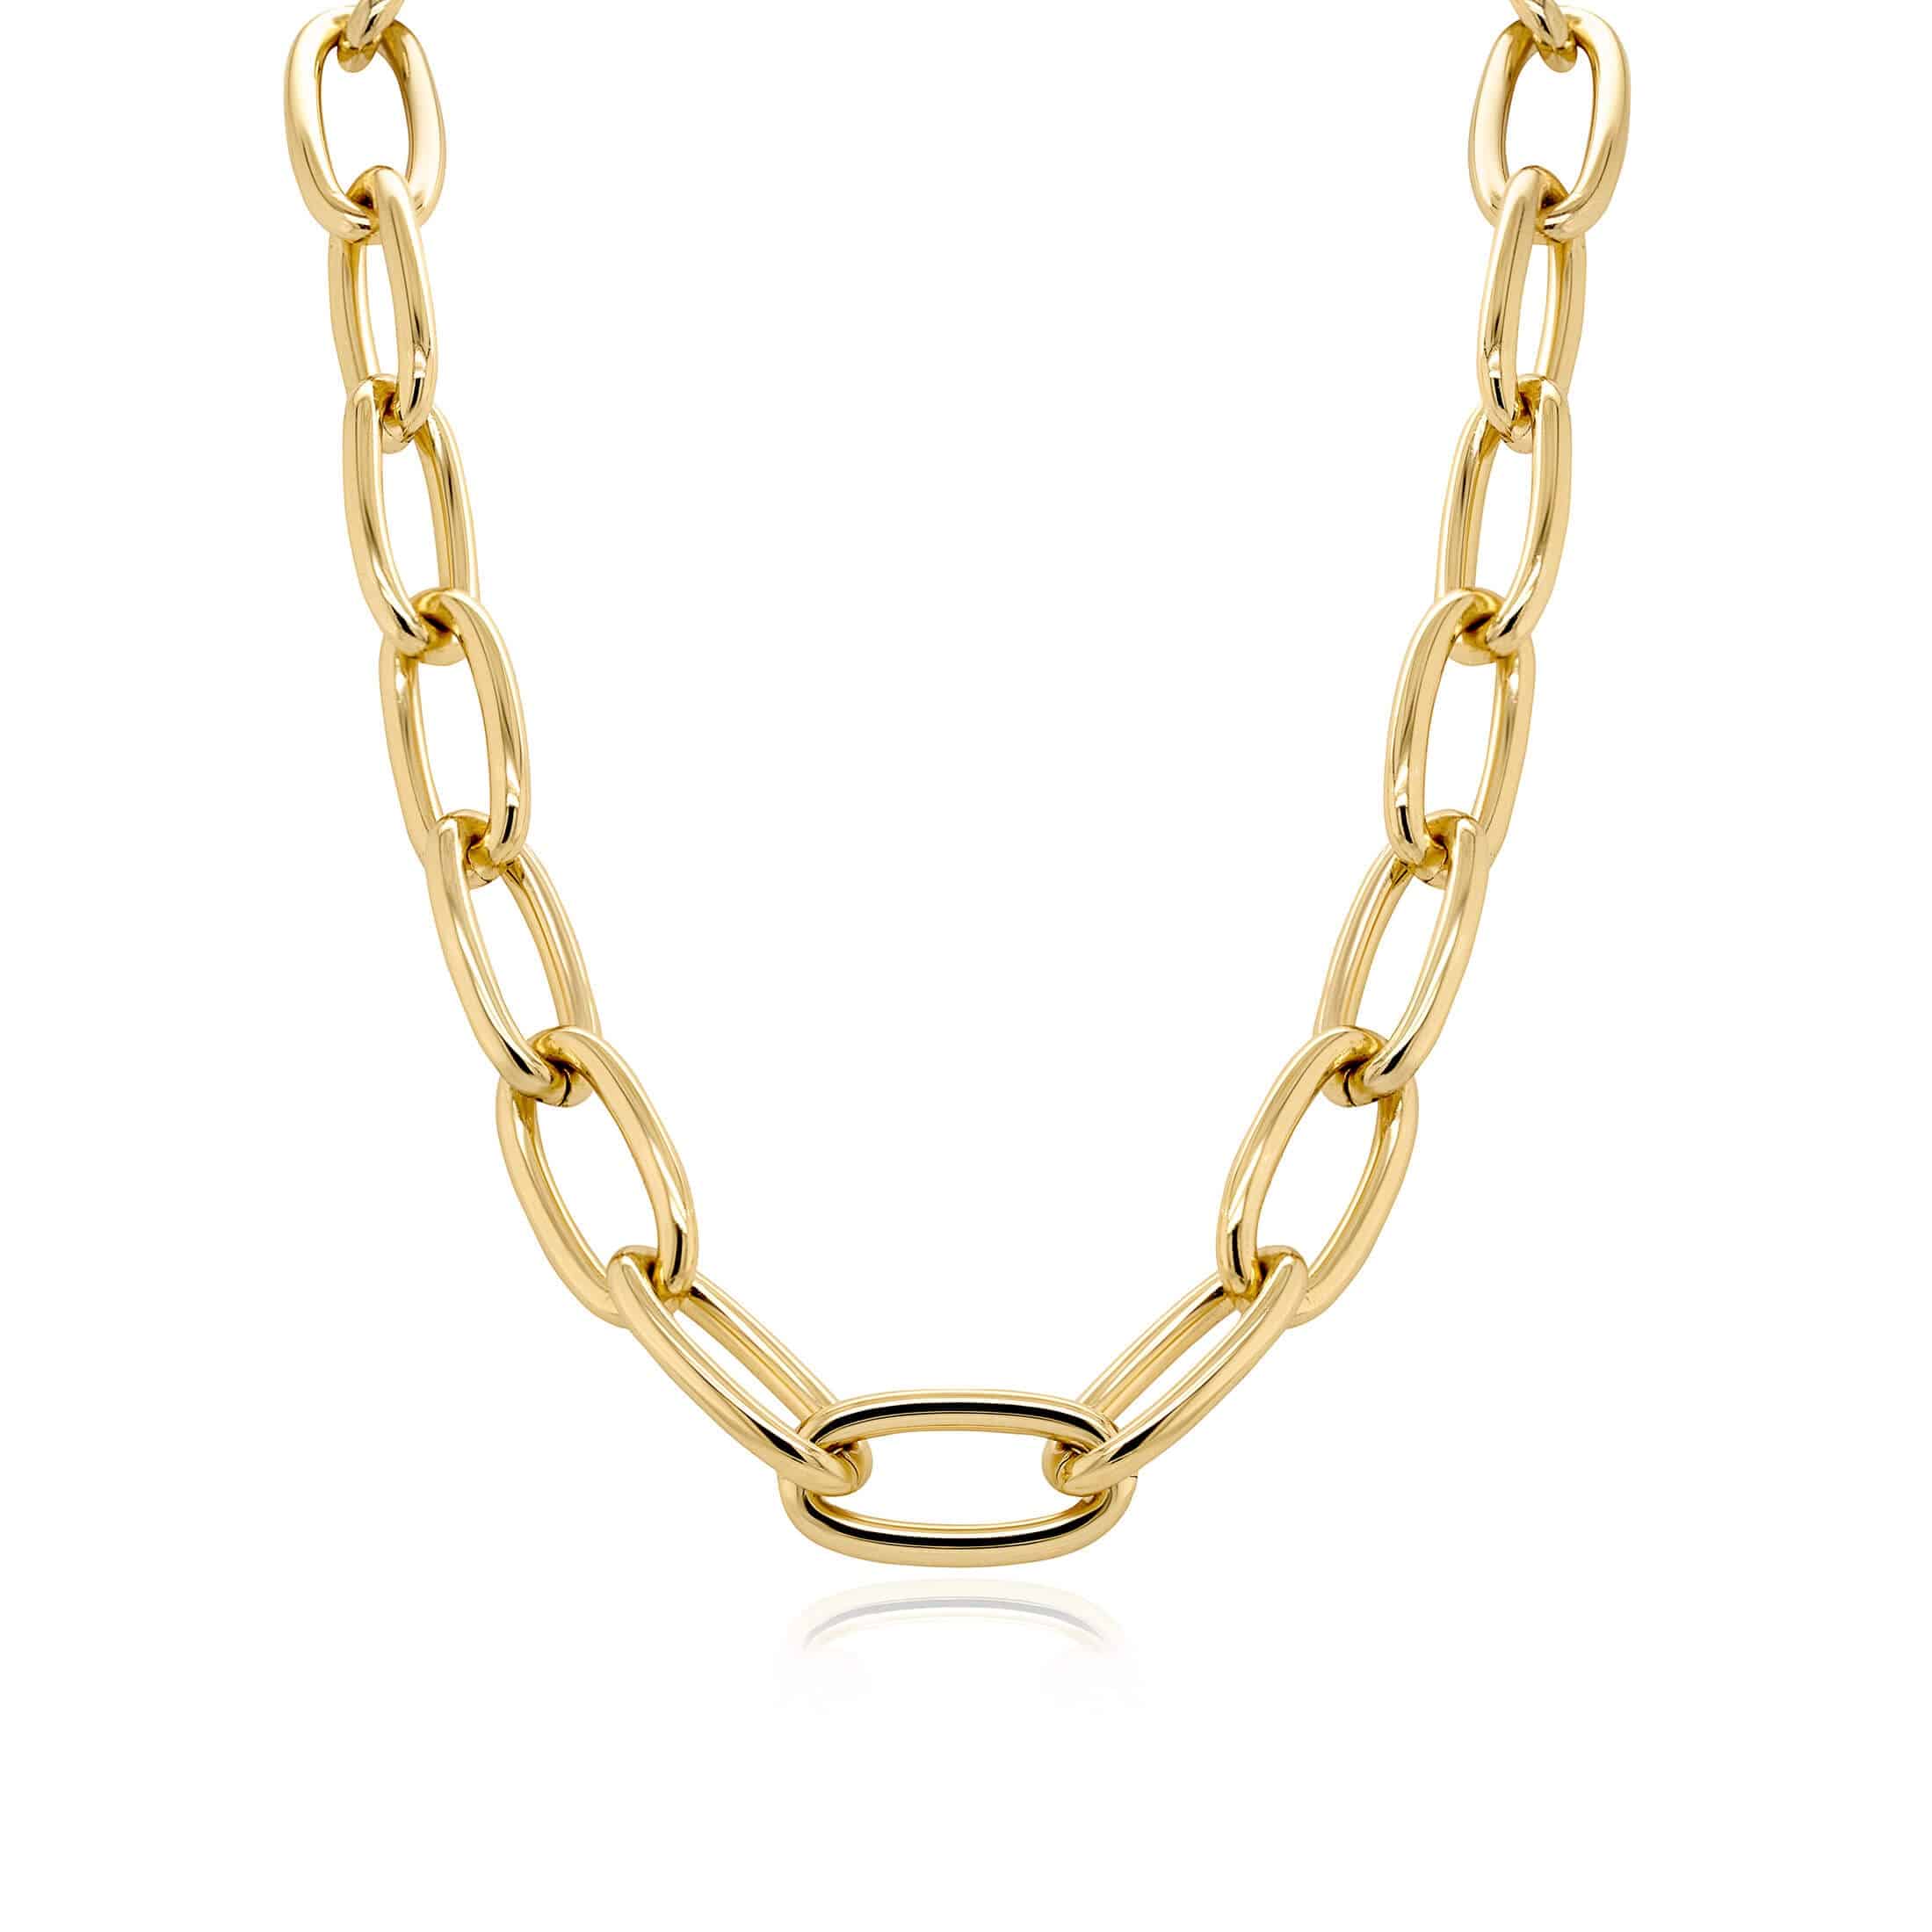 Melissa Odabash Gold Chunky Chain Necklace | Official Website